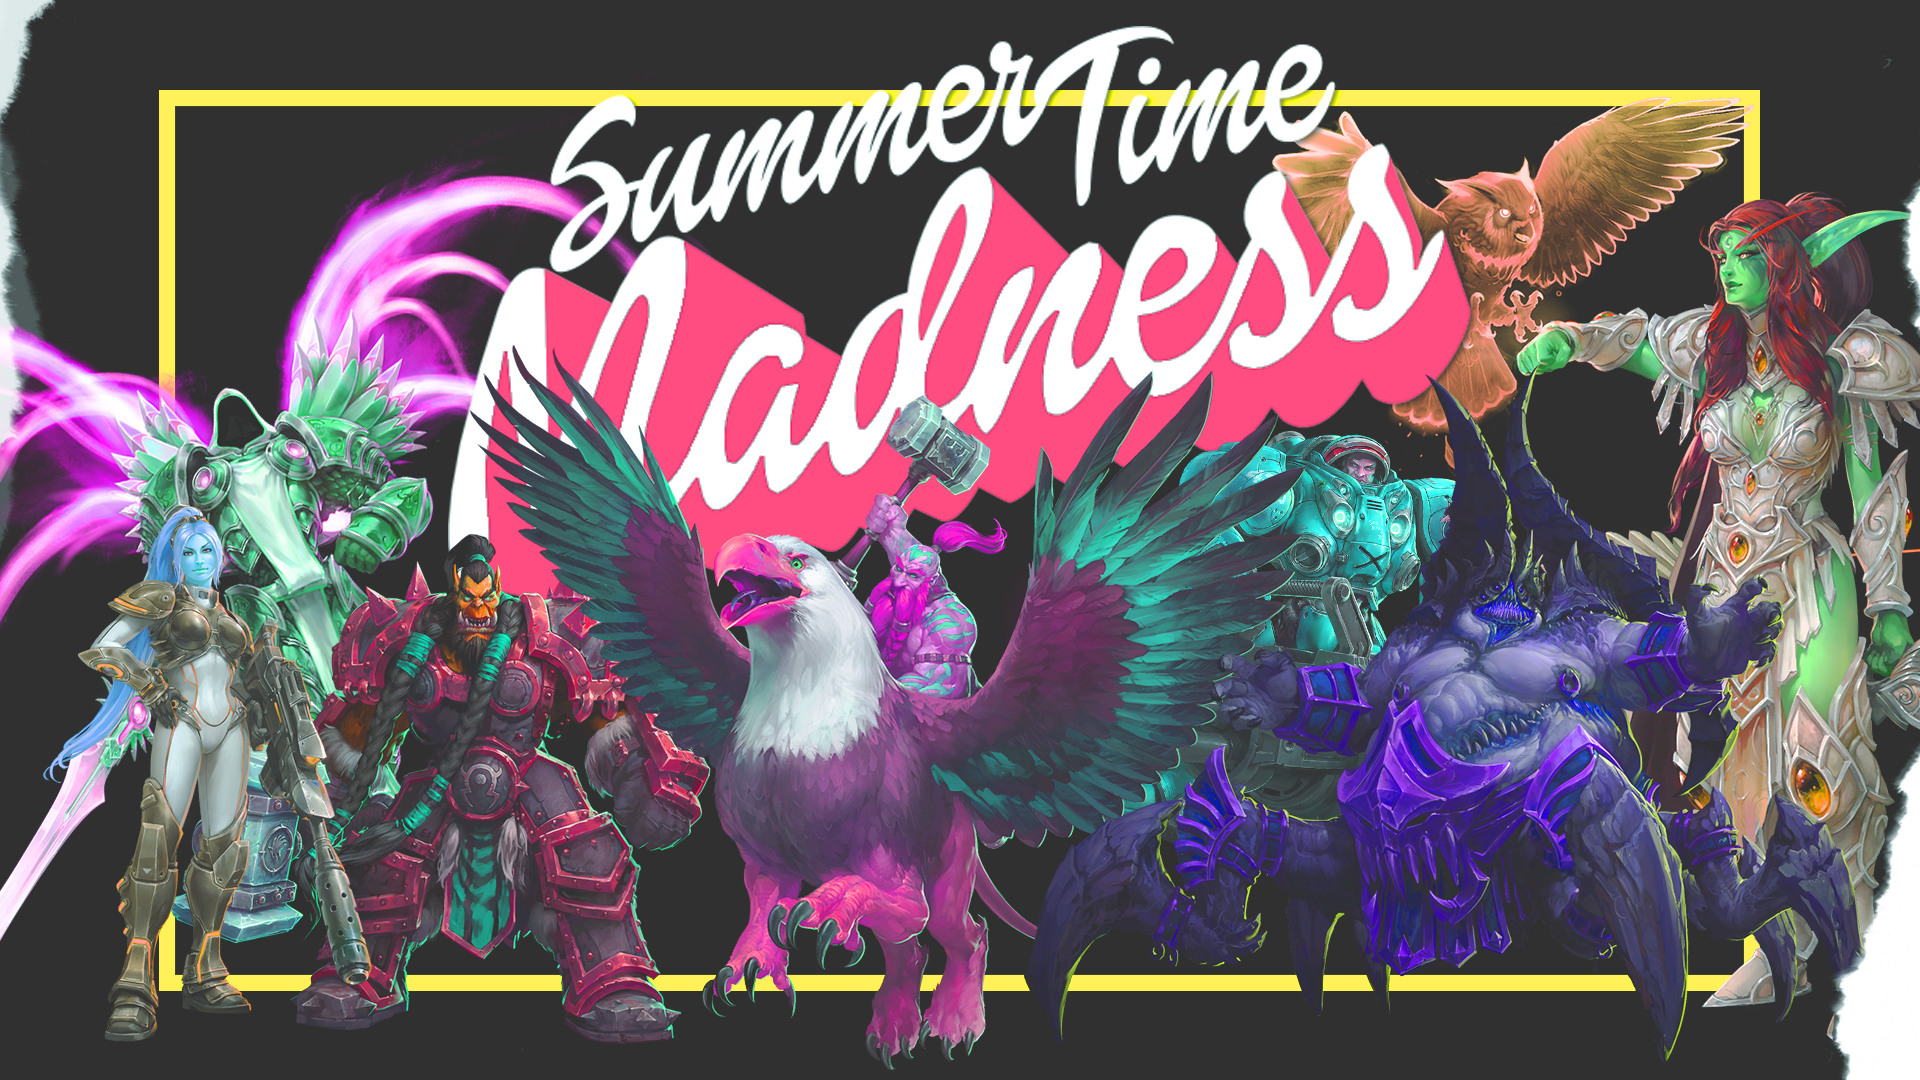 Summer Time Madness